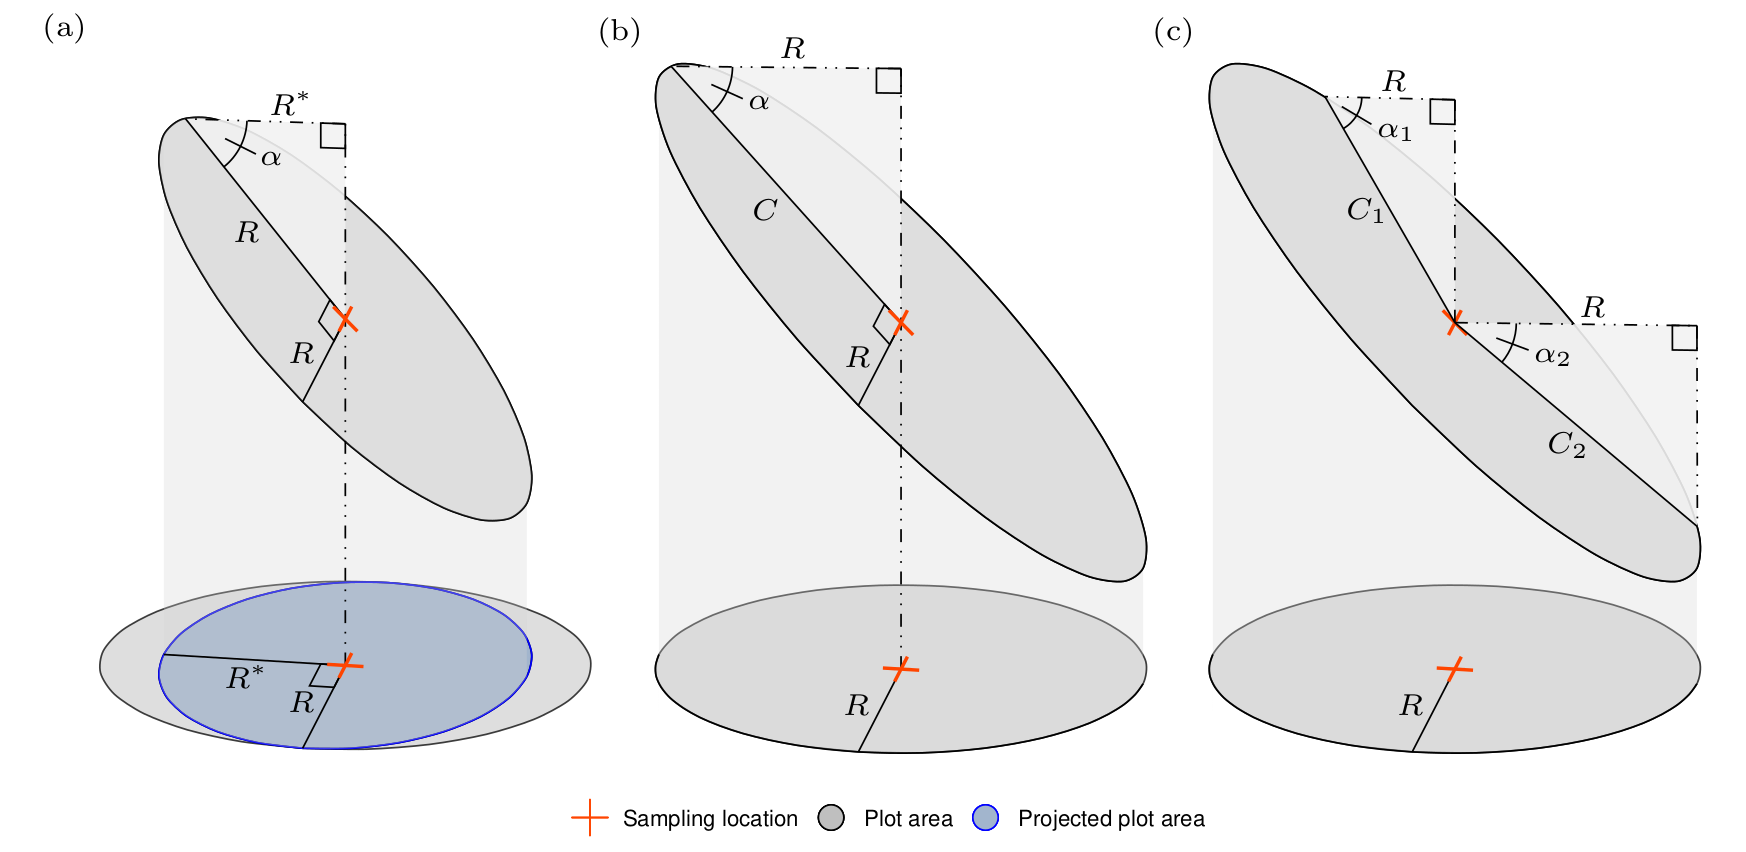 Illustration of how fixed-area circular plot dimensions change when projected between the horizontal (lower) and oblique (upper) planes. (a) Plot area when projecting a circular plot on an oblique plane onto the horizontal plane. (b-c) Examples used to find the oblique plane plot’s radius and critical distance given \(R\) and slope angle \(\alpha\).